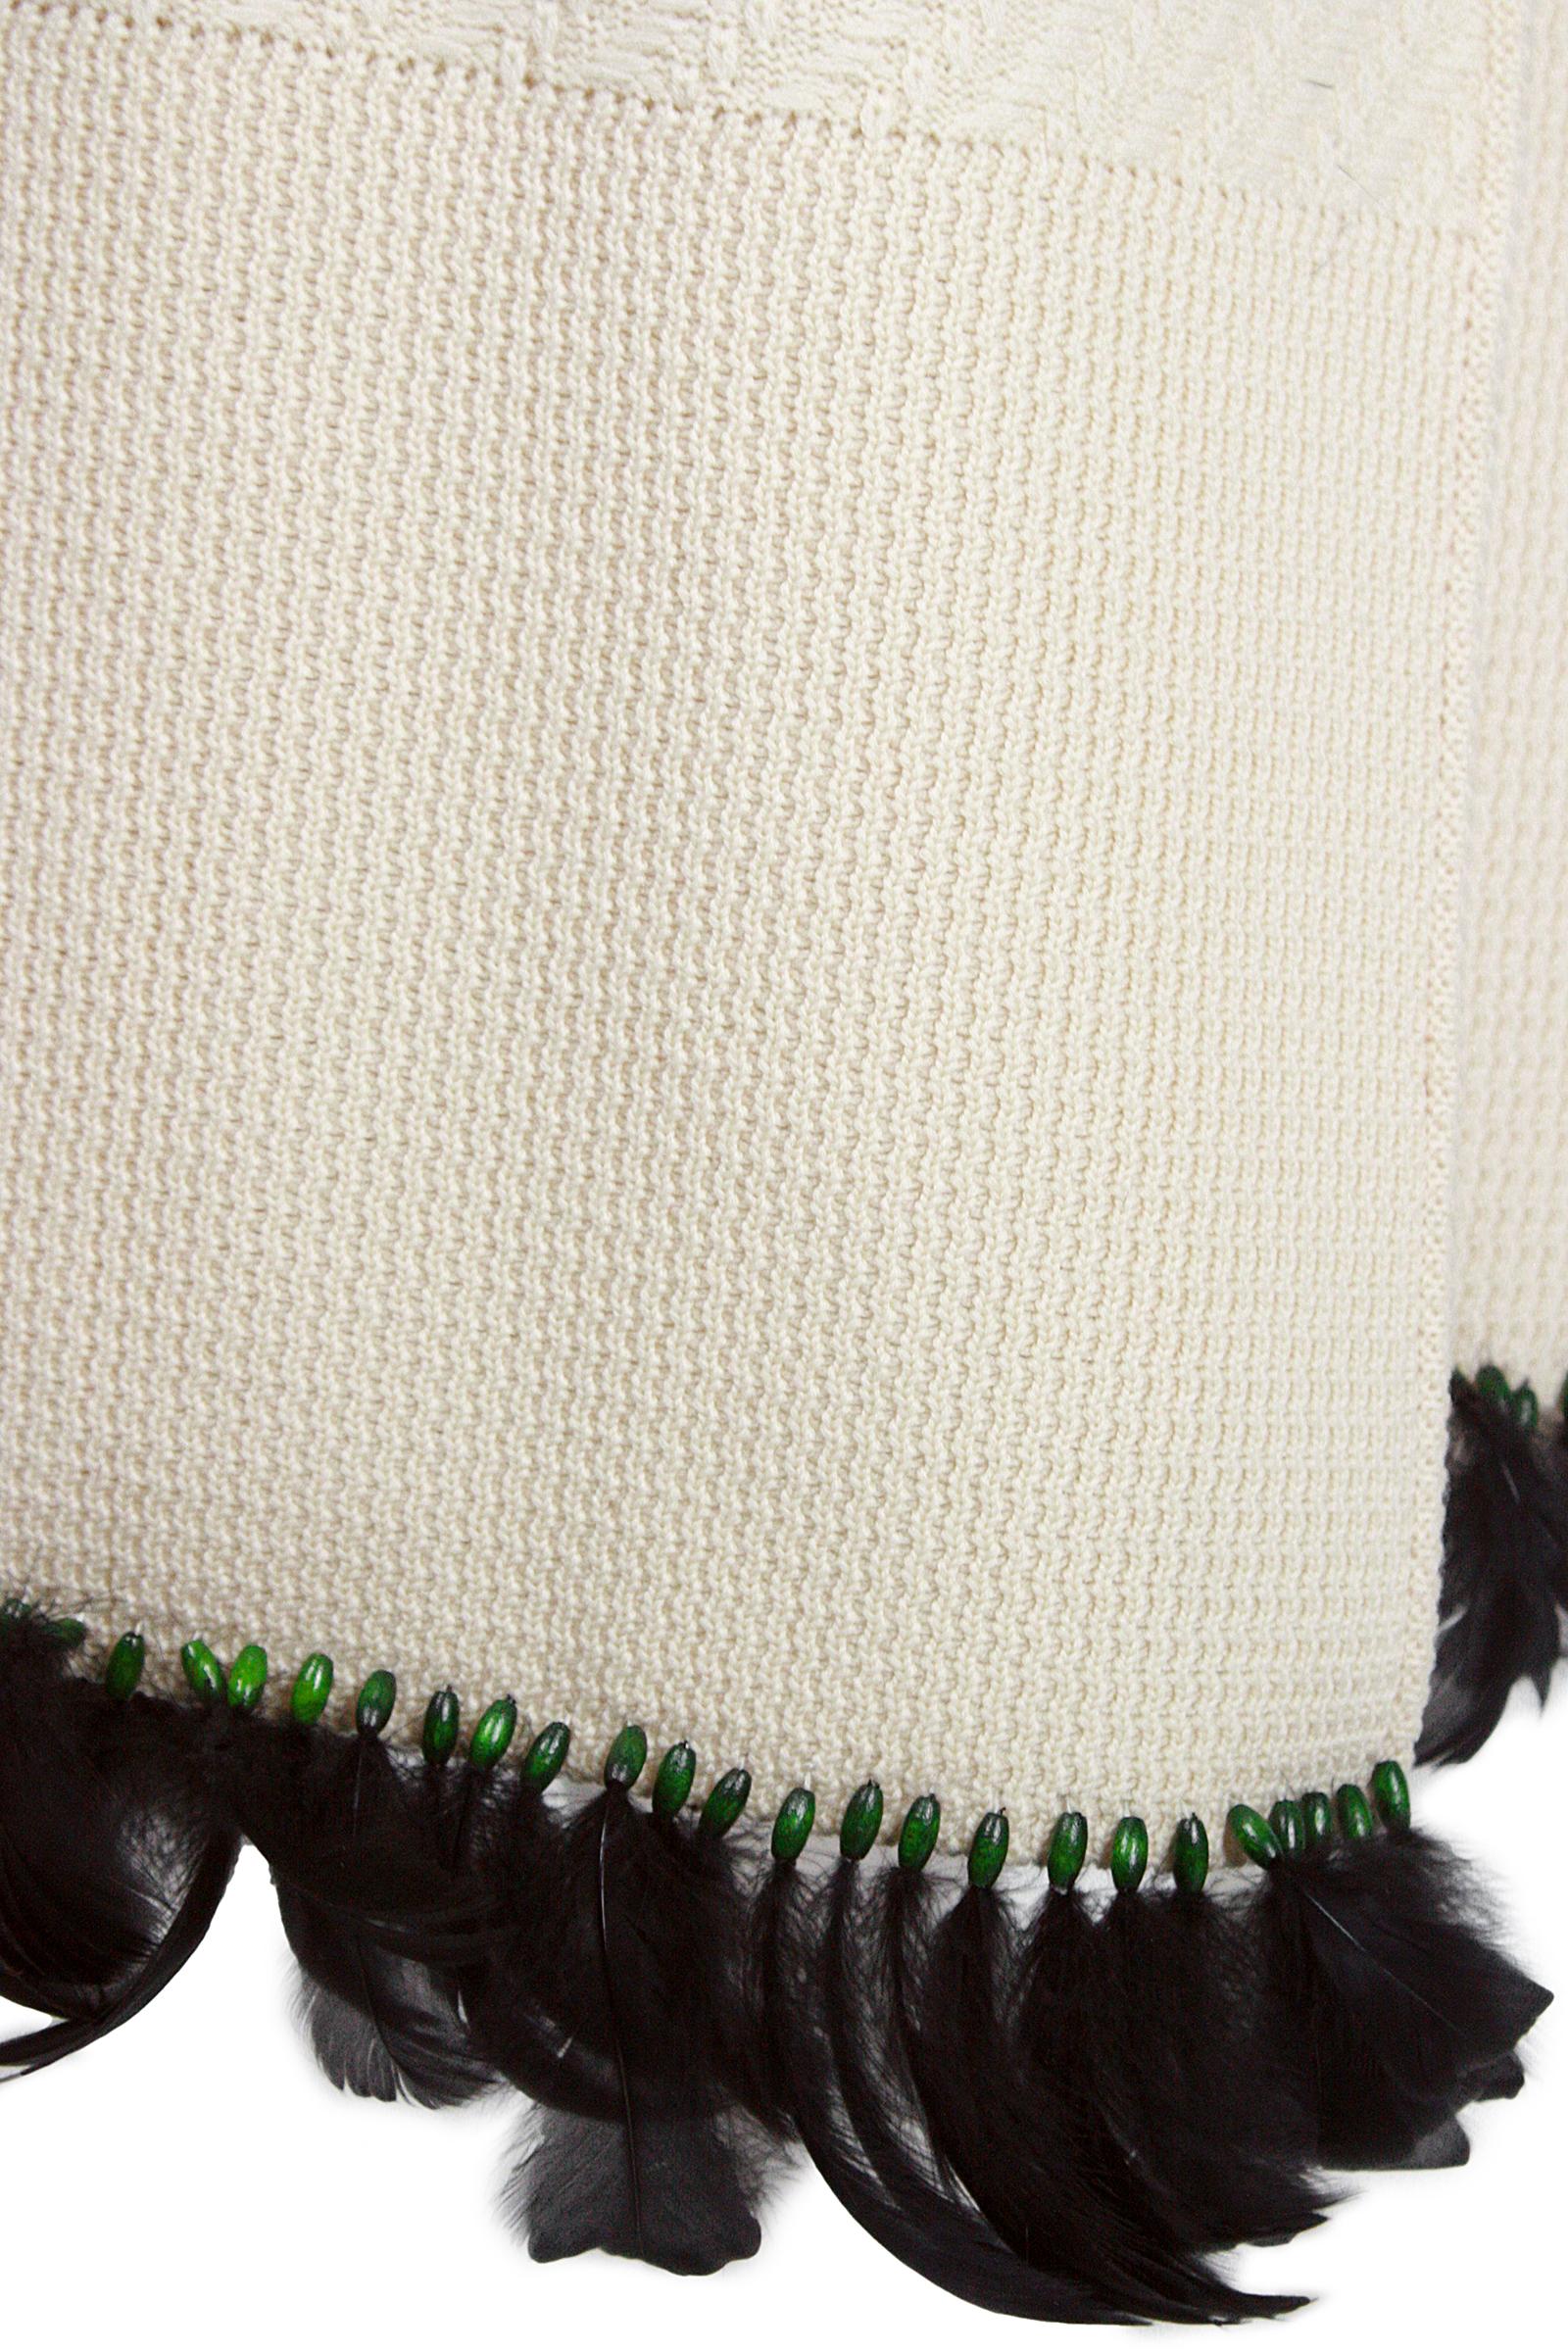 1990s John Galliano Cream Knit Wrap Skirt with Green Beads and Black Feathers 1